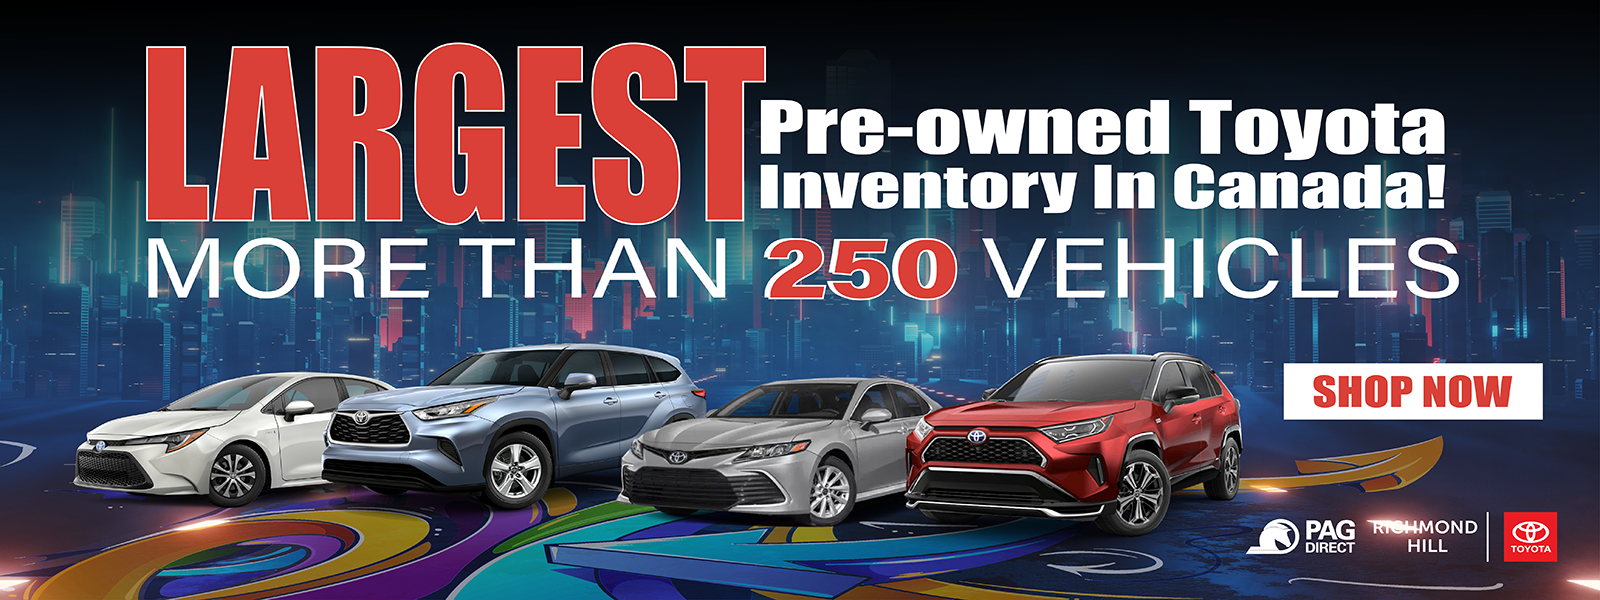 250 Pre-owned Units